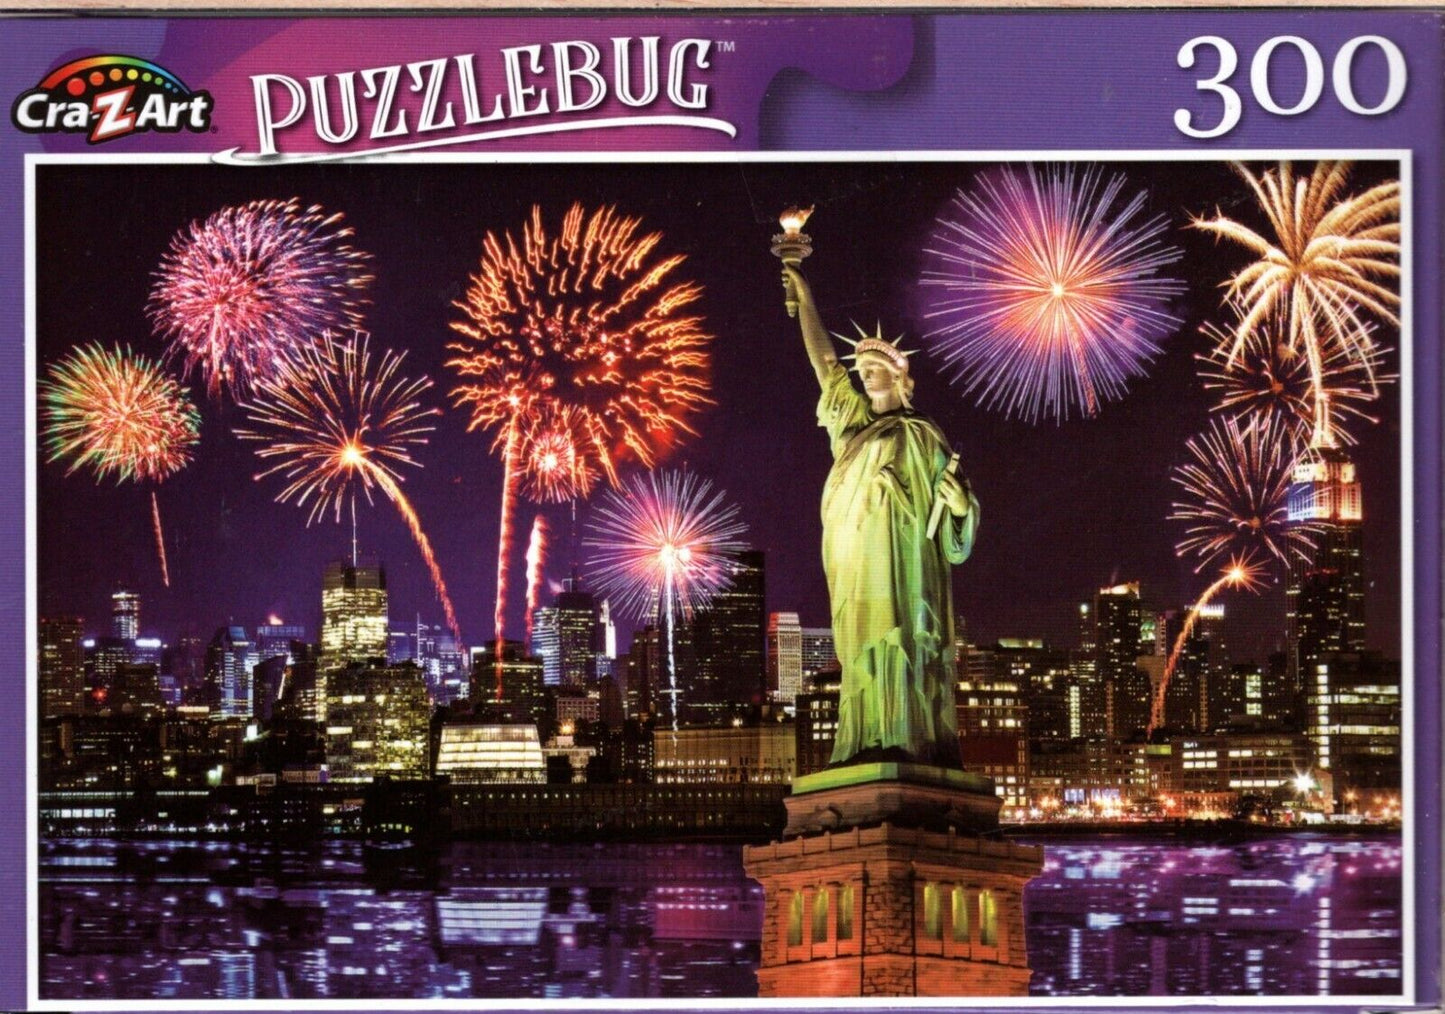 Fireworks at Night, NYC - 300 Pieces Jigsaw Puzzle